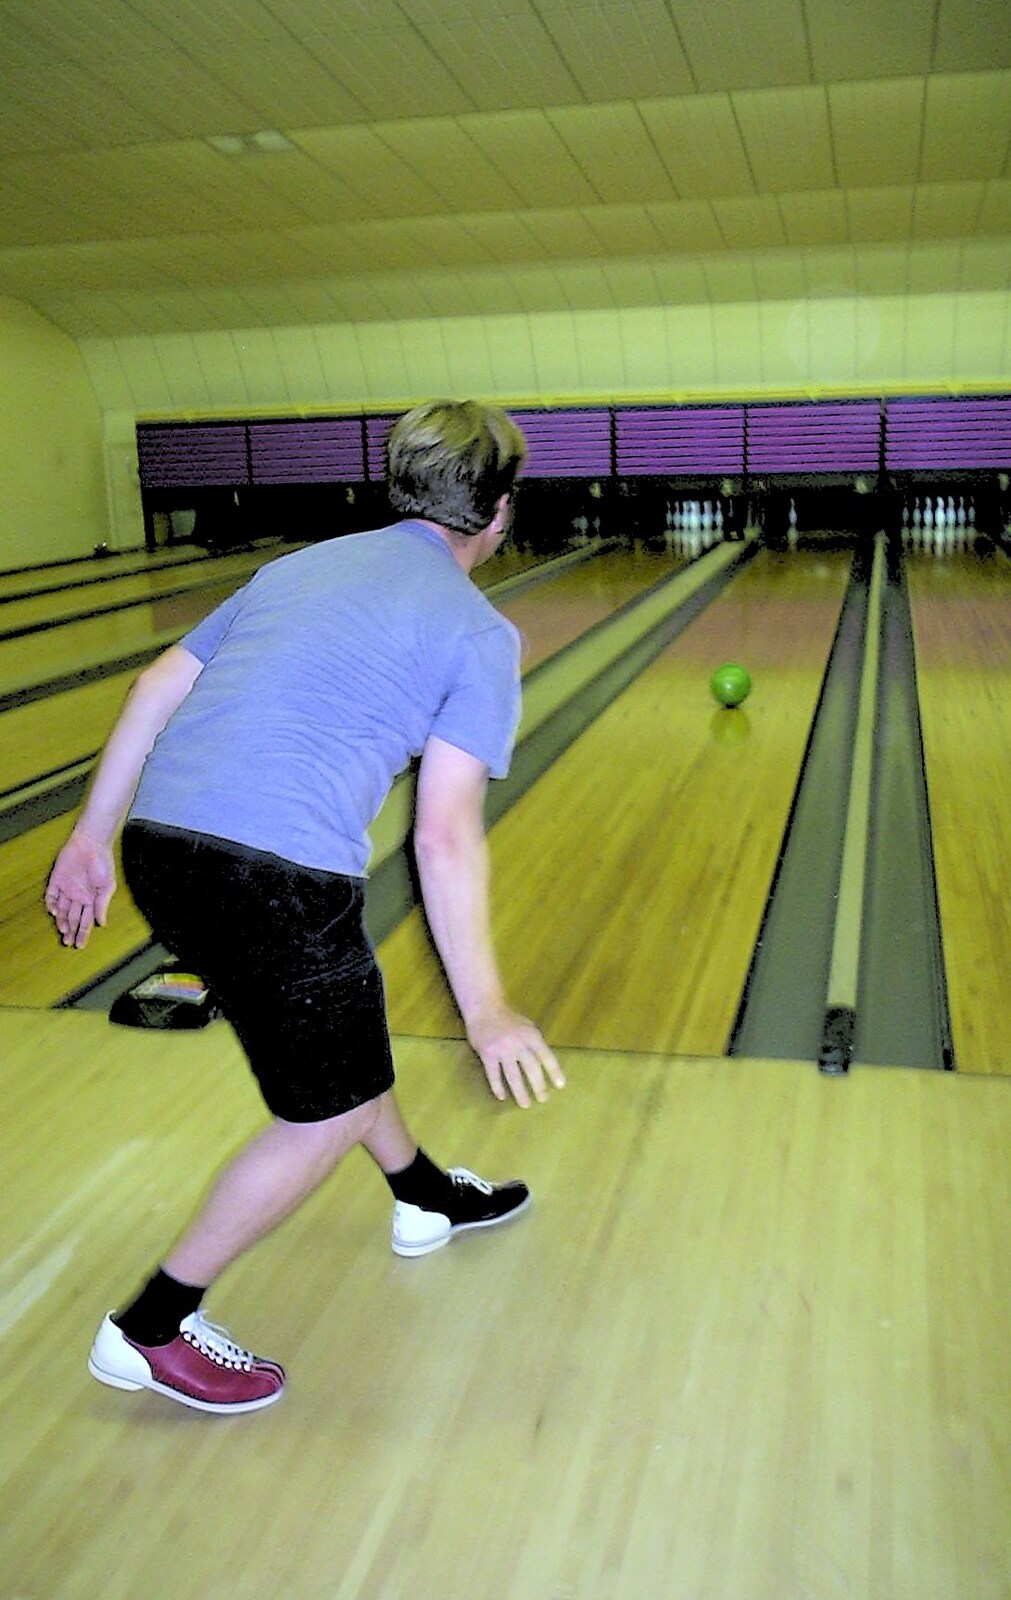 Marc hurls one up the lane from Ten Pin Bowling, Norwich, Norfolk - 13th September 2003